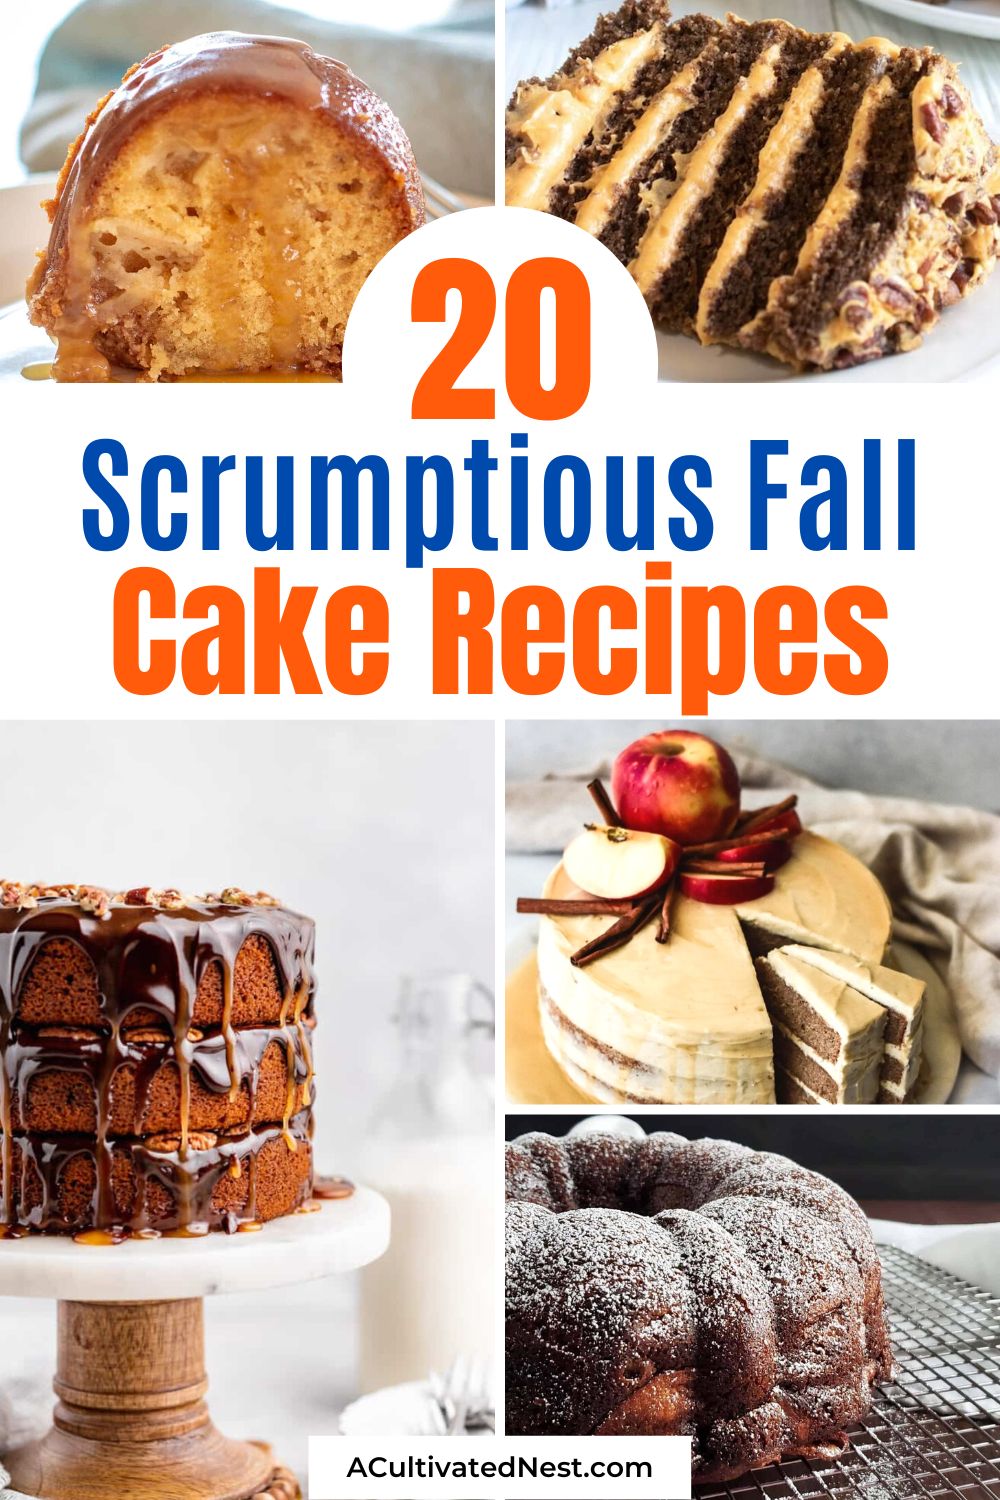 20 Scrumptious Fall Cake Recipes- A tasty way to celebrate autumn is with these scrumptious fall cake recipes! There are so many tasty desserts you can make in the fall! | #cakeRecipes #dessertRecipes #recipes #autumnRecipes #ACultivatedNest